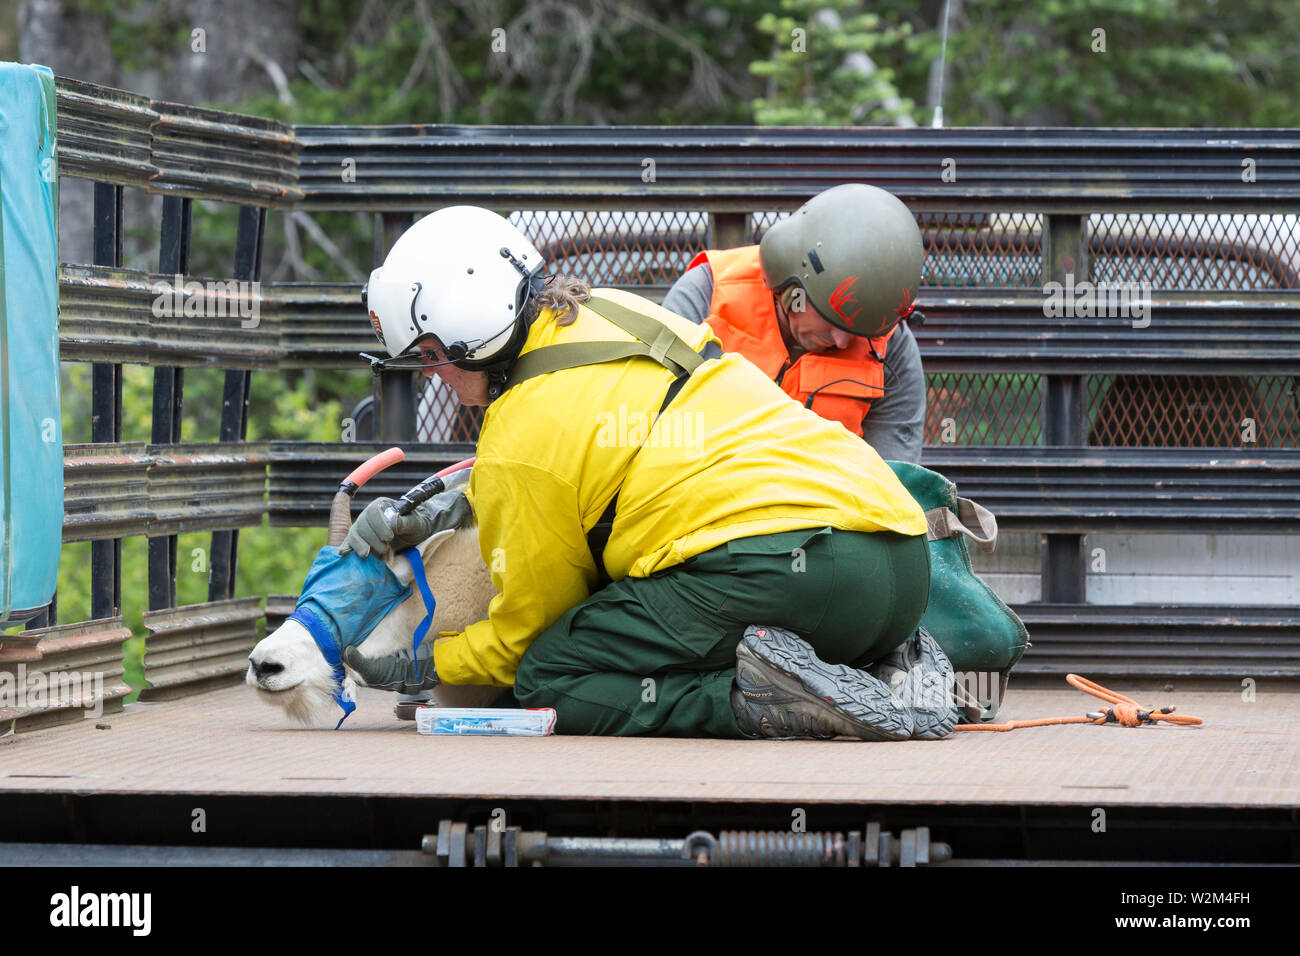 Wildlife biologist Patti Happe and Derrick Halsey with Leading Edge Aviation hold a tranquilized mountain goat during transport at Hurricane Ridge in Olympic National Park, Washington on July 9, 2019. Today is the second day of a two-week long capture and translocation process moving mountain goats from Olympic National Park to the northern Cascade Mountains. The effort is a collaboration between the National Park Service, the Washington Department of Fish & Wildlife and the USDA Forest Service to re-establish depleted populations of mountain goats in the Northern Cascades while also removing Stock Photo